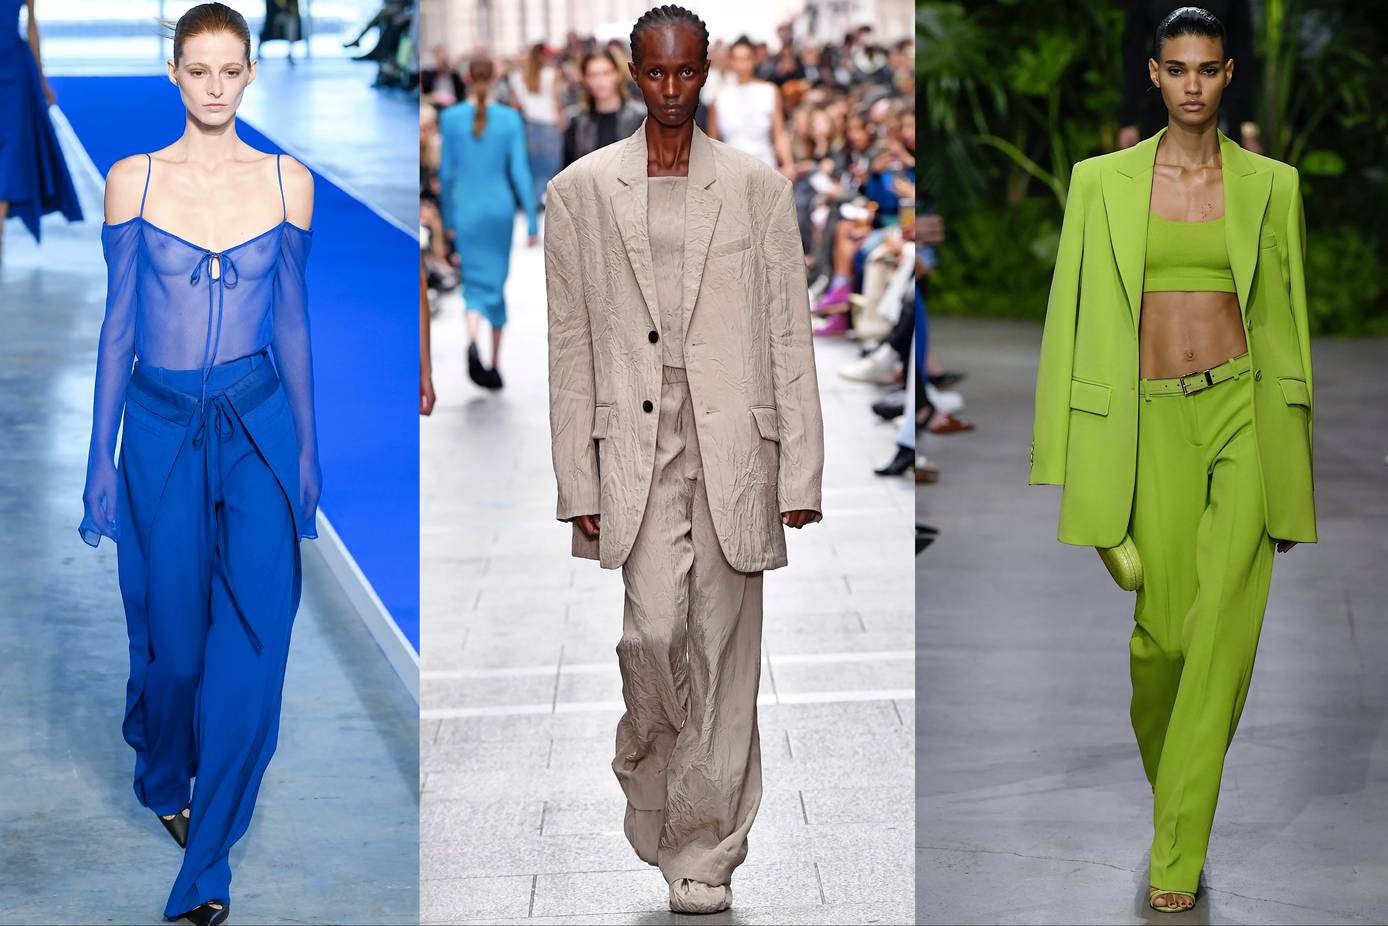 Bottega Green Is The Trendiest Summer Color Of The Year - How To